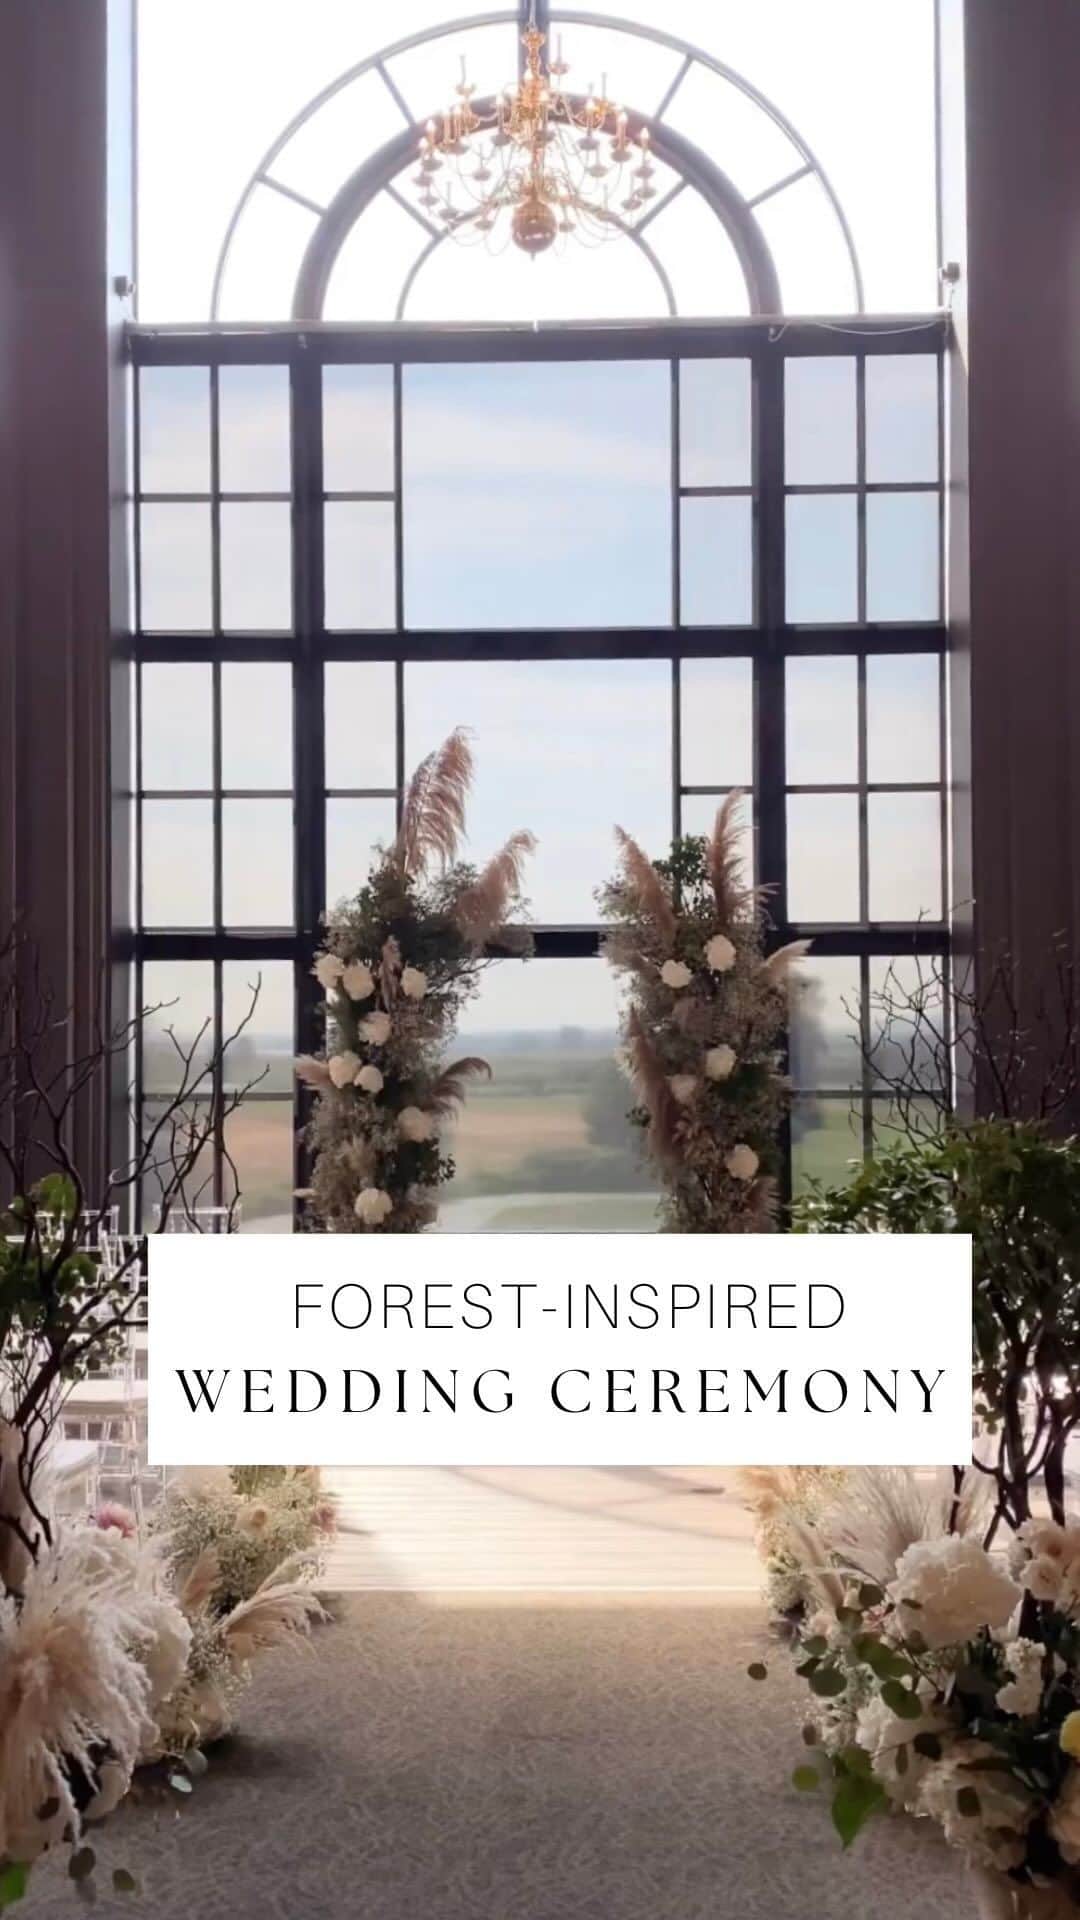 WEDDING APPARELのインスタグラム：「This is your sign to have an enchanted forest wedding! ✨ Soft tones, boho-chic florals, and attention to detail brought this dreamy wedding ceremony to life. Tag someone who needs to see this below 👇   Florals @dushanflowers  Planner @melissaortanezevents  Venue @swanesetevents  #weddinginspo #modernwedding  #weddingplanning #weddingreceptiondecor #bohemianwedding  #weddingceremony  #weddingdetails #weddingdecor #ceremonydecor  #weddingday #weddingideas #weddingdecoration #weddinginspiration #weddingflowers #gardenwedding #weddingtable #weddingaisle #glamwedding #bridgerton #weddings  #weddingaisledecor #eventdesign #weddingphotography #eventdecor  #weddingdetails #weddingwednesday  #bohowedding」